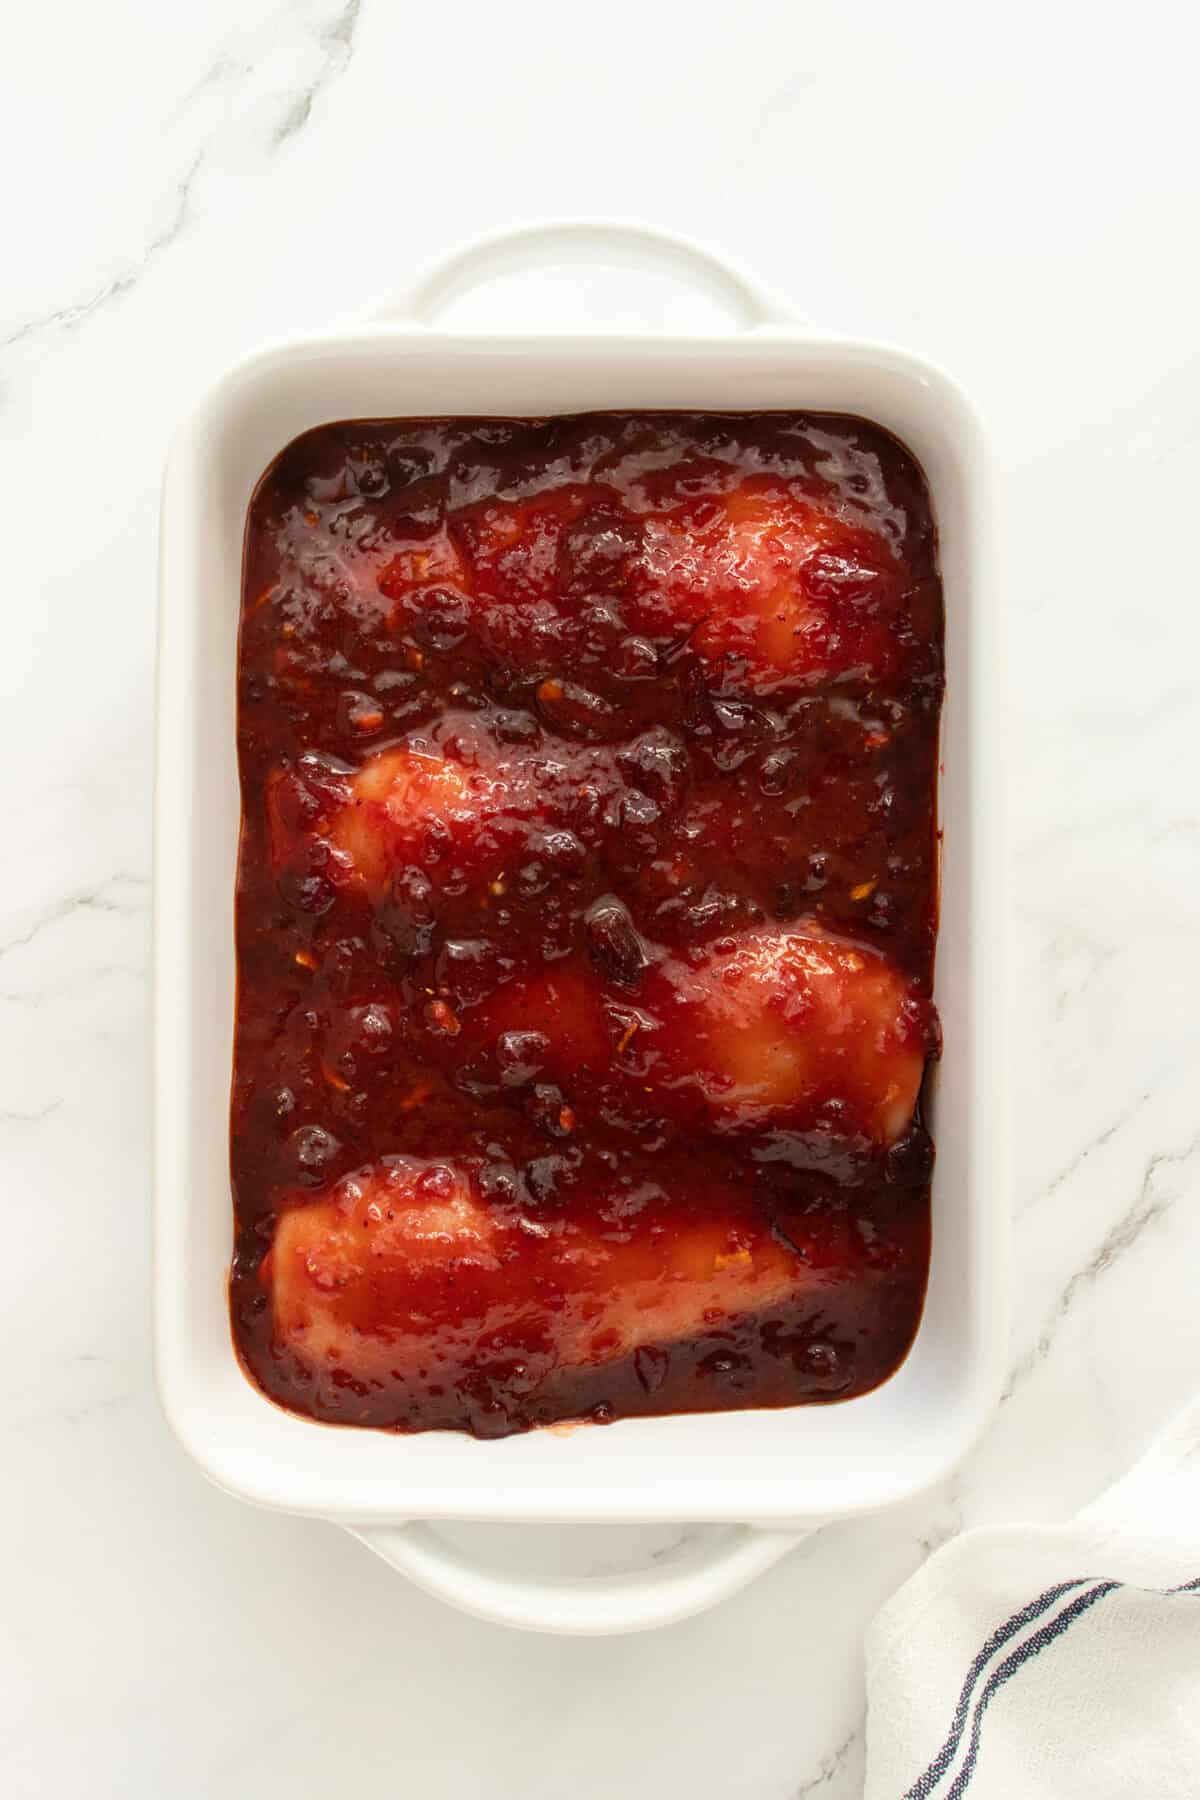 Cranberry chicken uncooked in baking pan